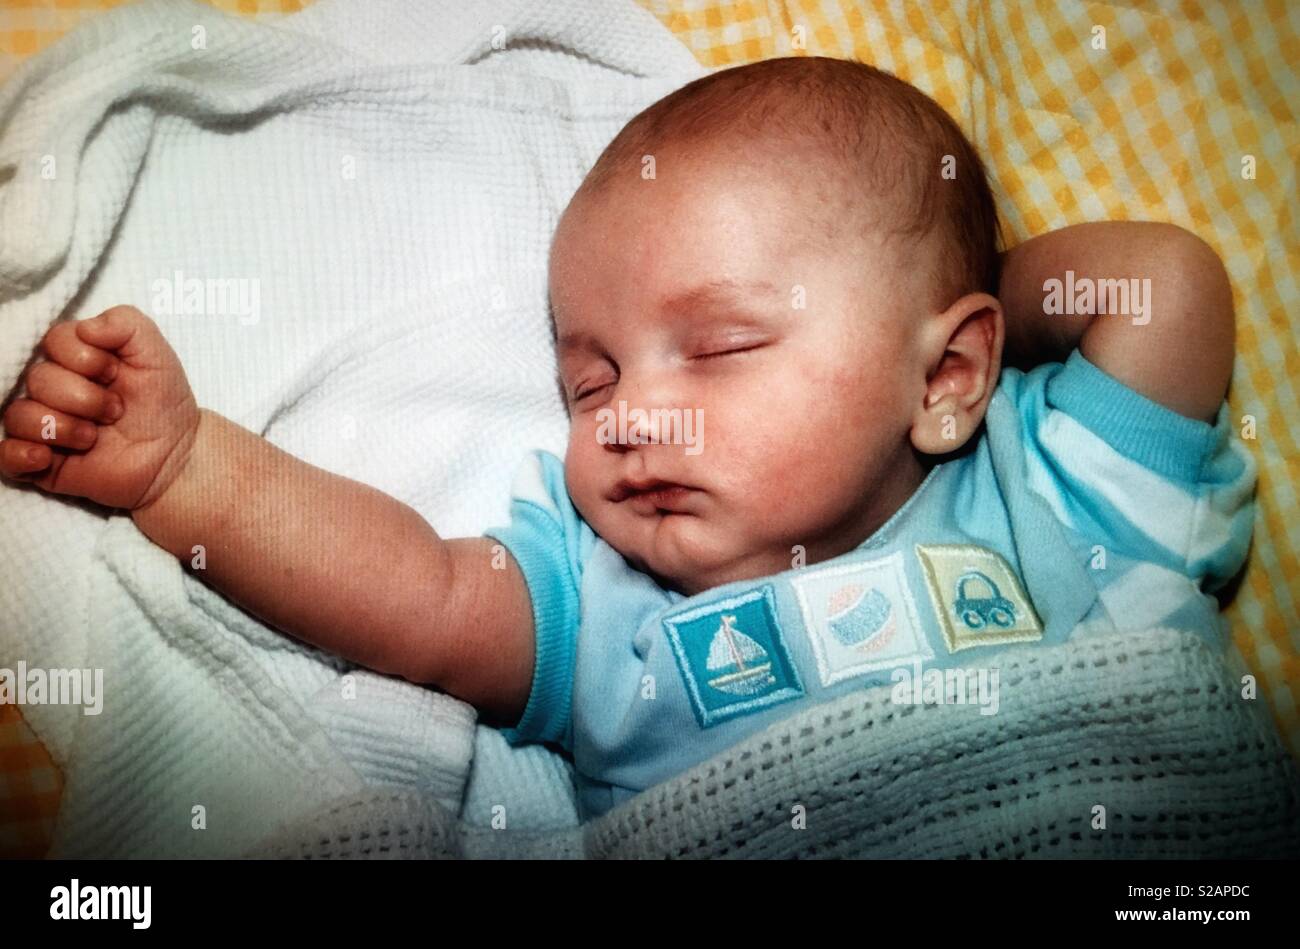 A baby boy sleeping with his arm extended Stock Photo